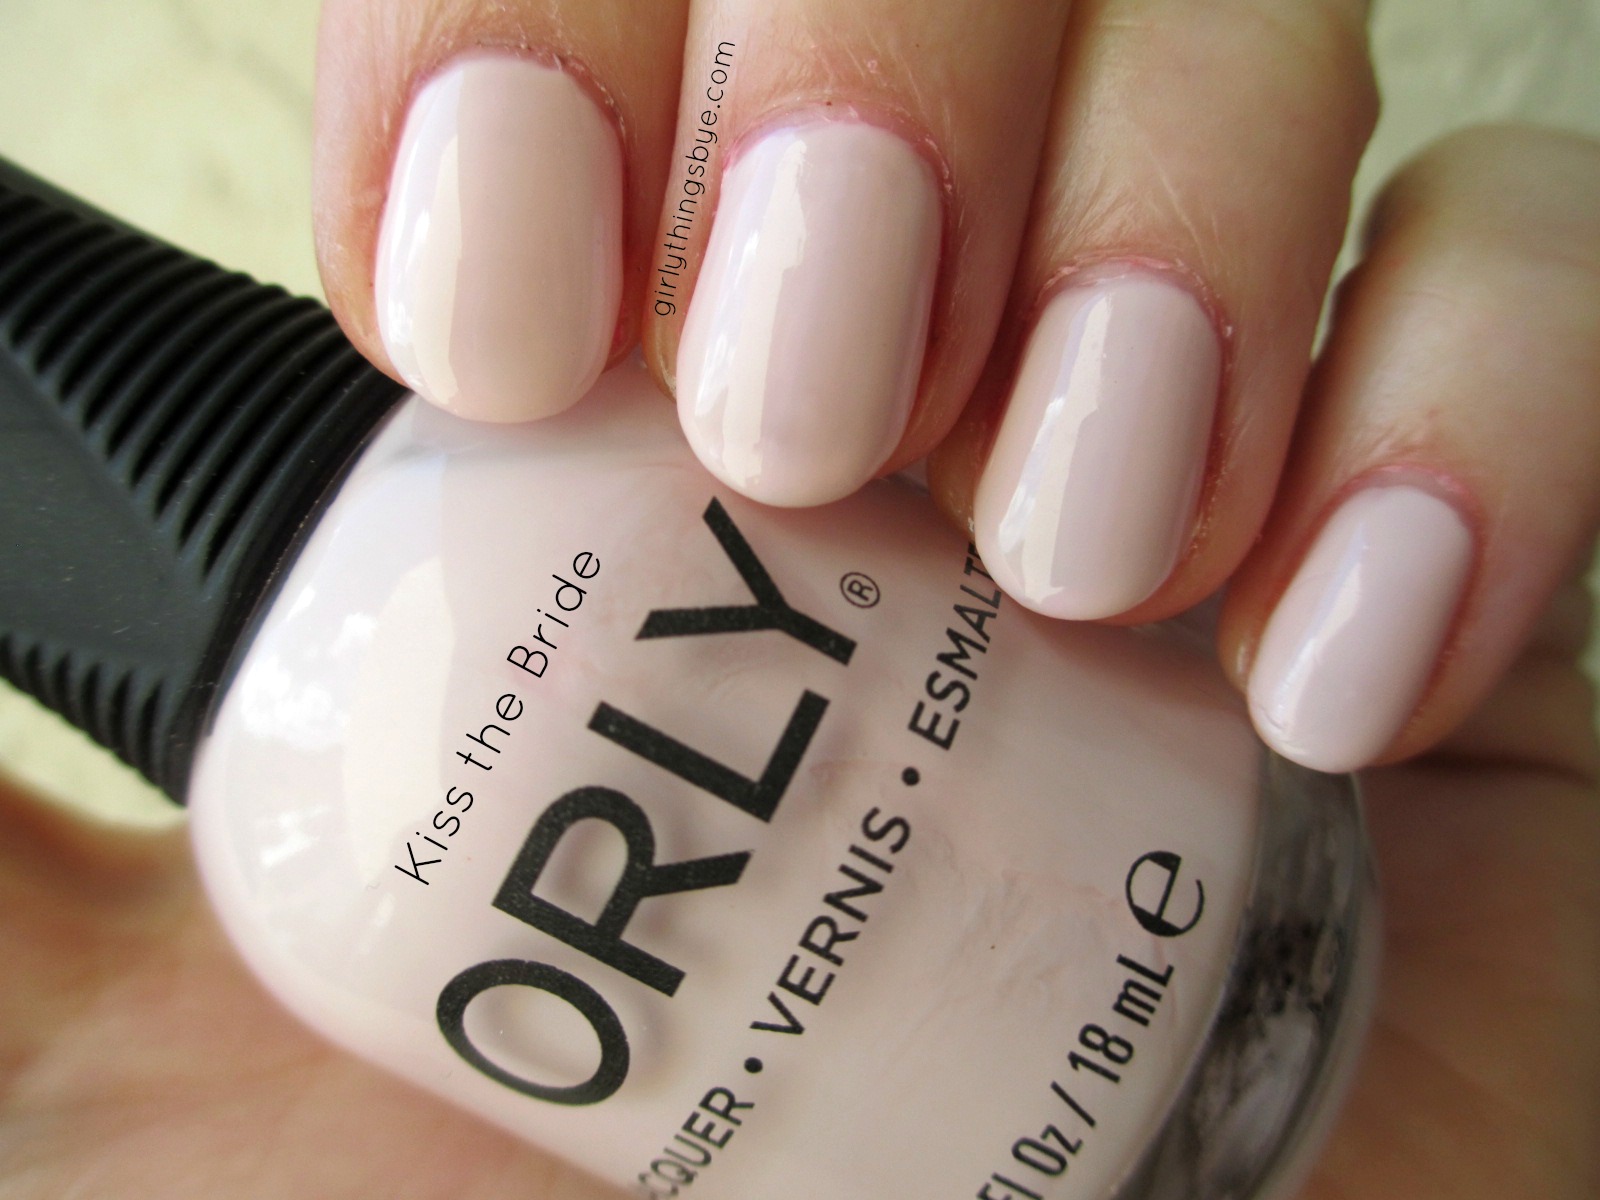 Orly Nail Lacquer in First Kiss - wide 4